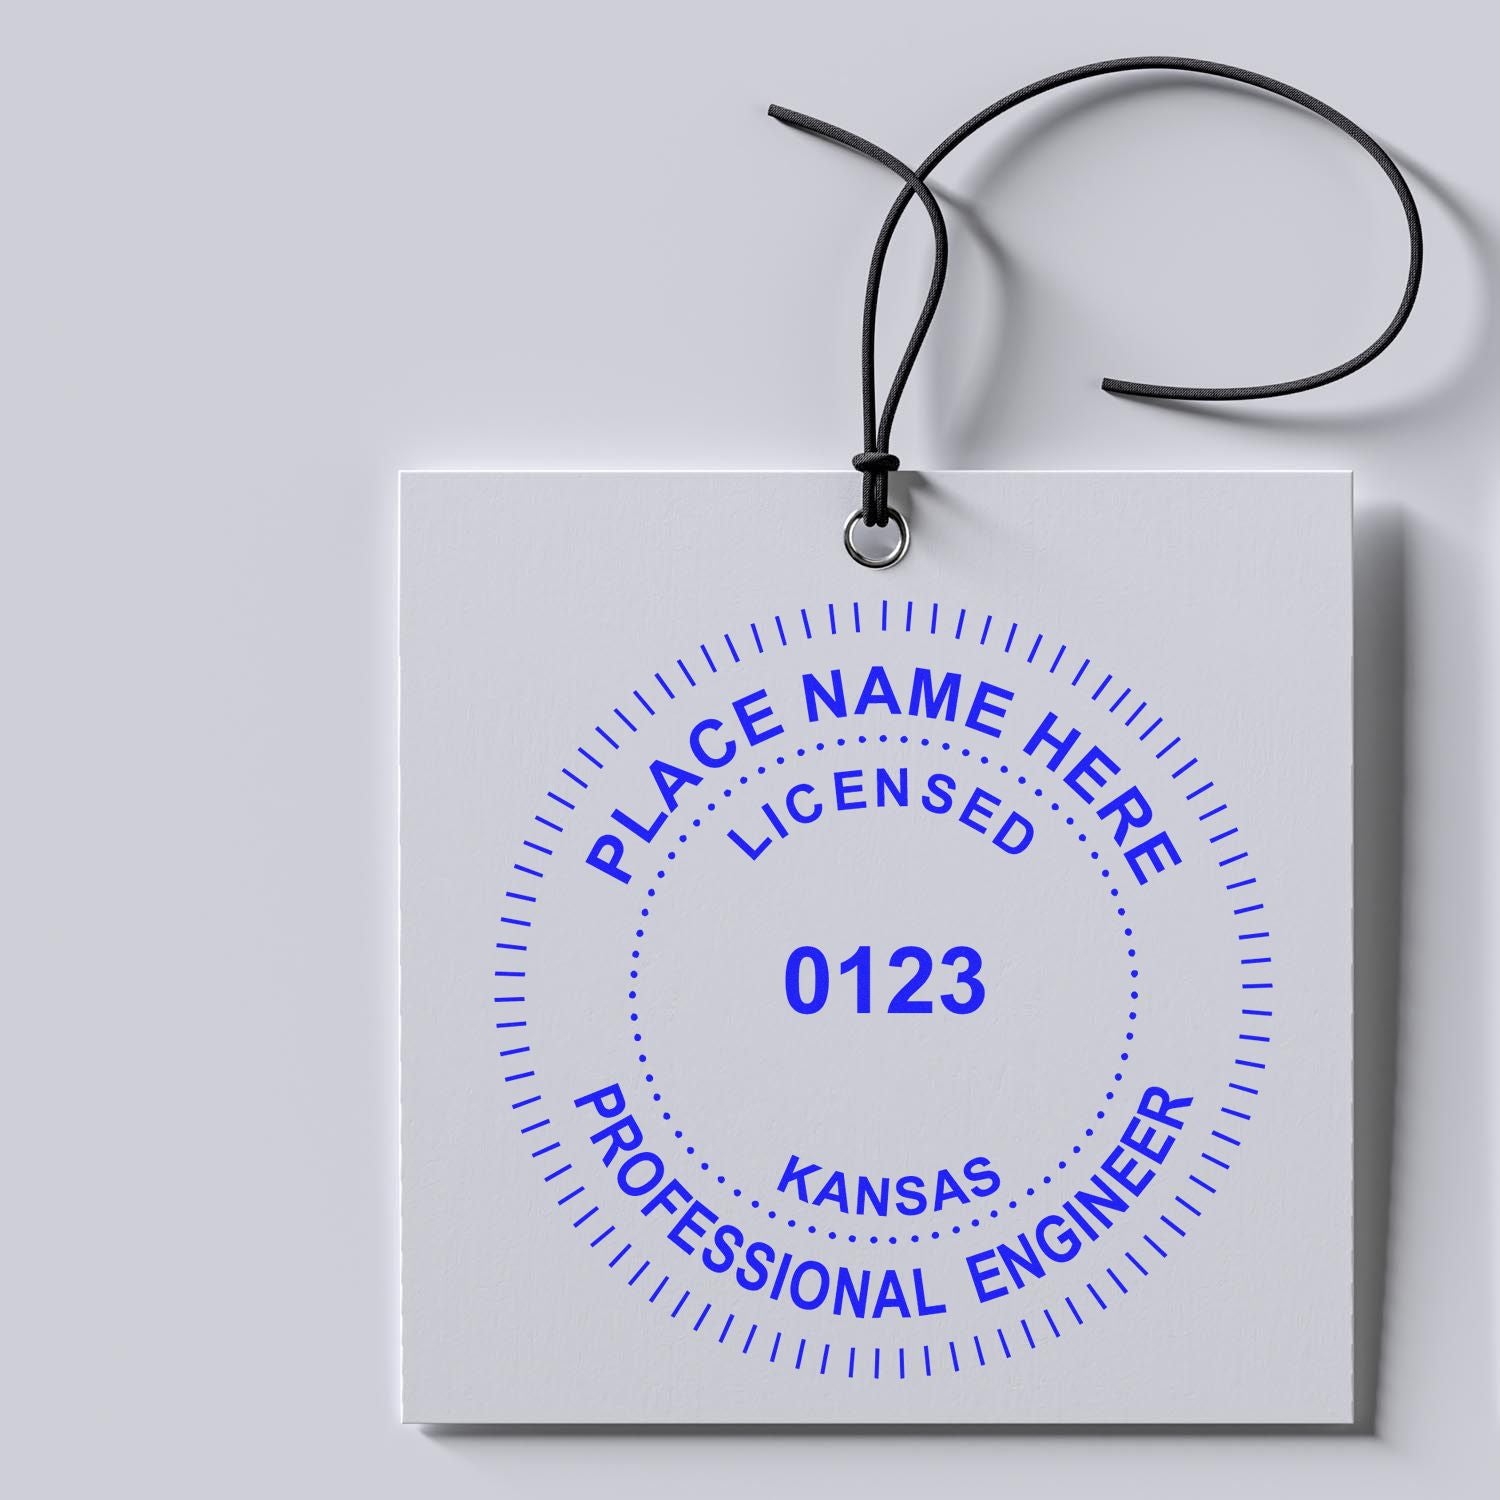 Renew Your Engineering Success: Kansas PE Stamp Renewal Guide Feature Image